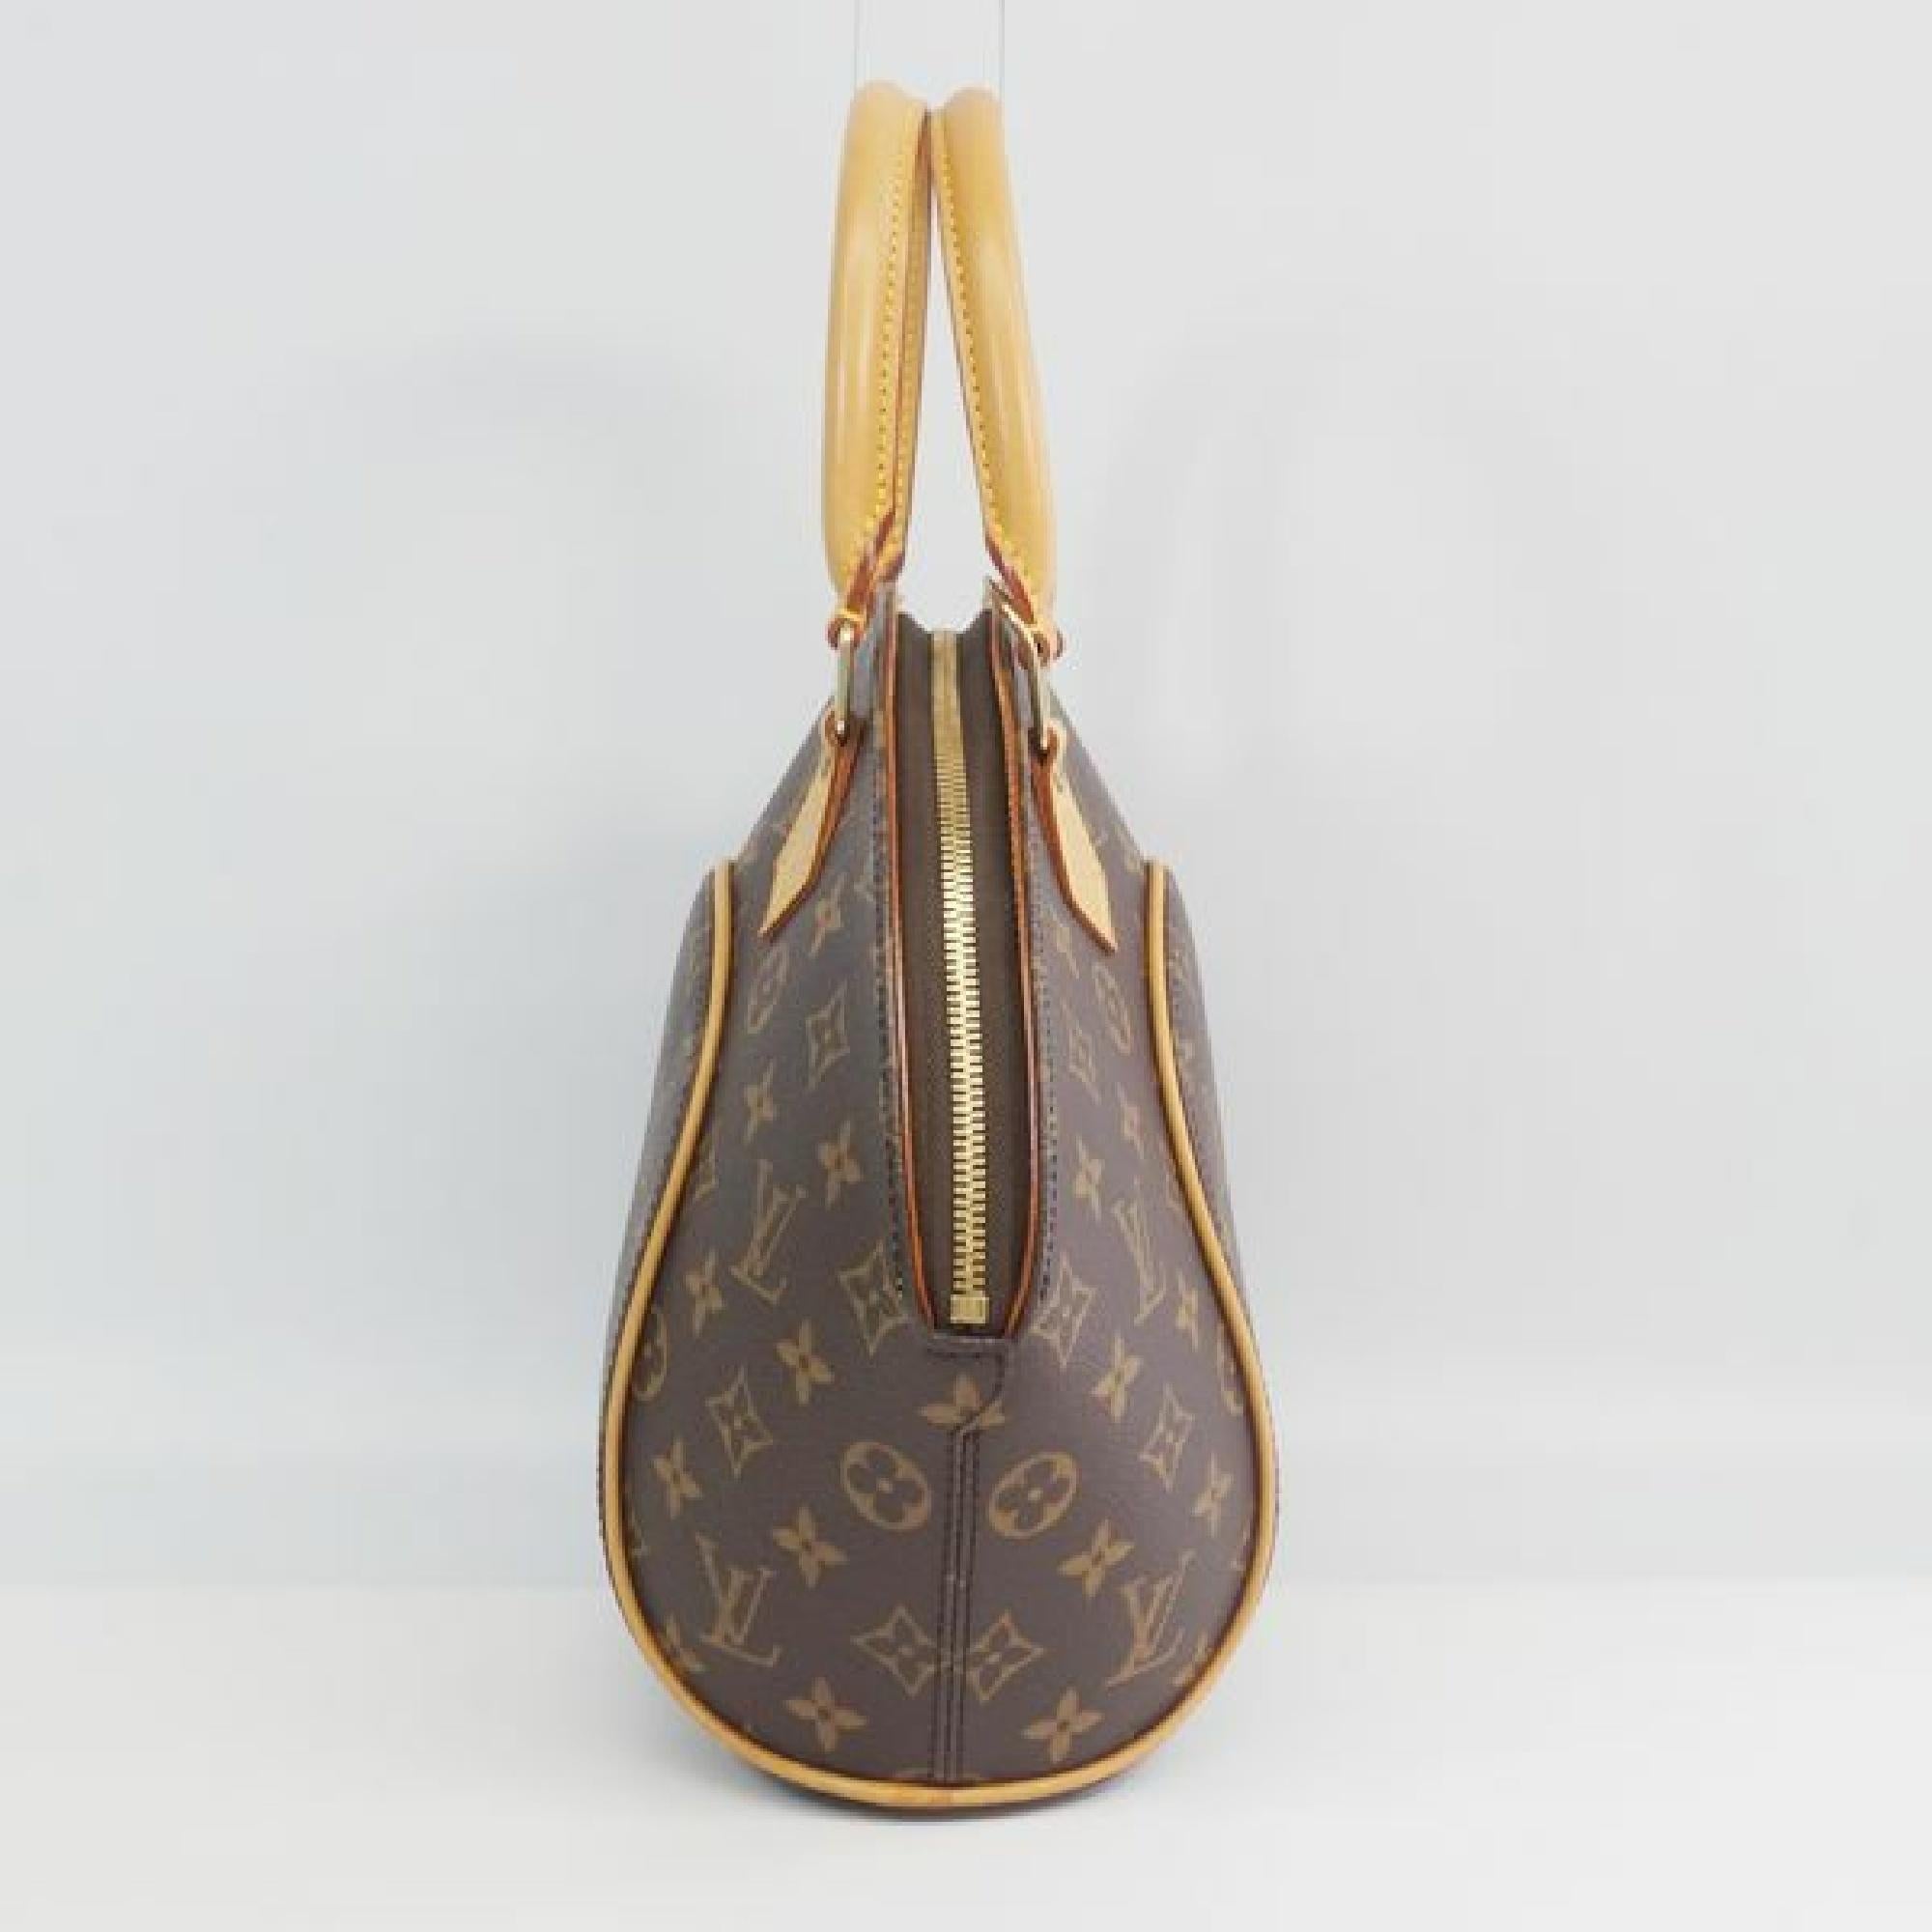 An authentic LOUIS VUITTON Ellipse PM Womens handbag M51127 The outside material is Monogram canvas. The pattern is EllipsePM. This item is Vintage / Classic. The year of manufacture would be 1997.
Rank
AB signs of wear (Small)
Used goods in good